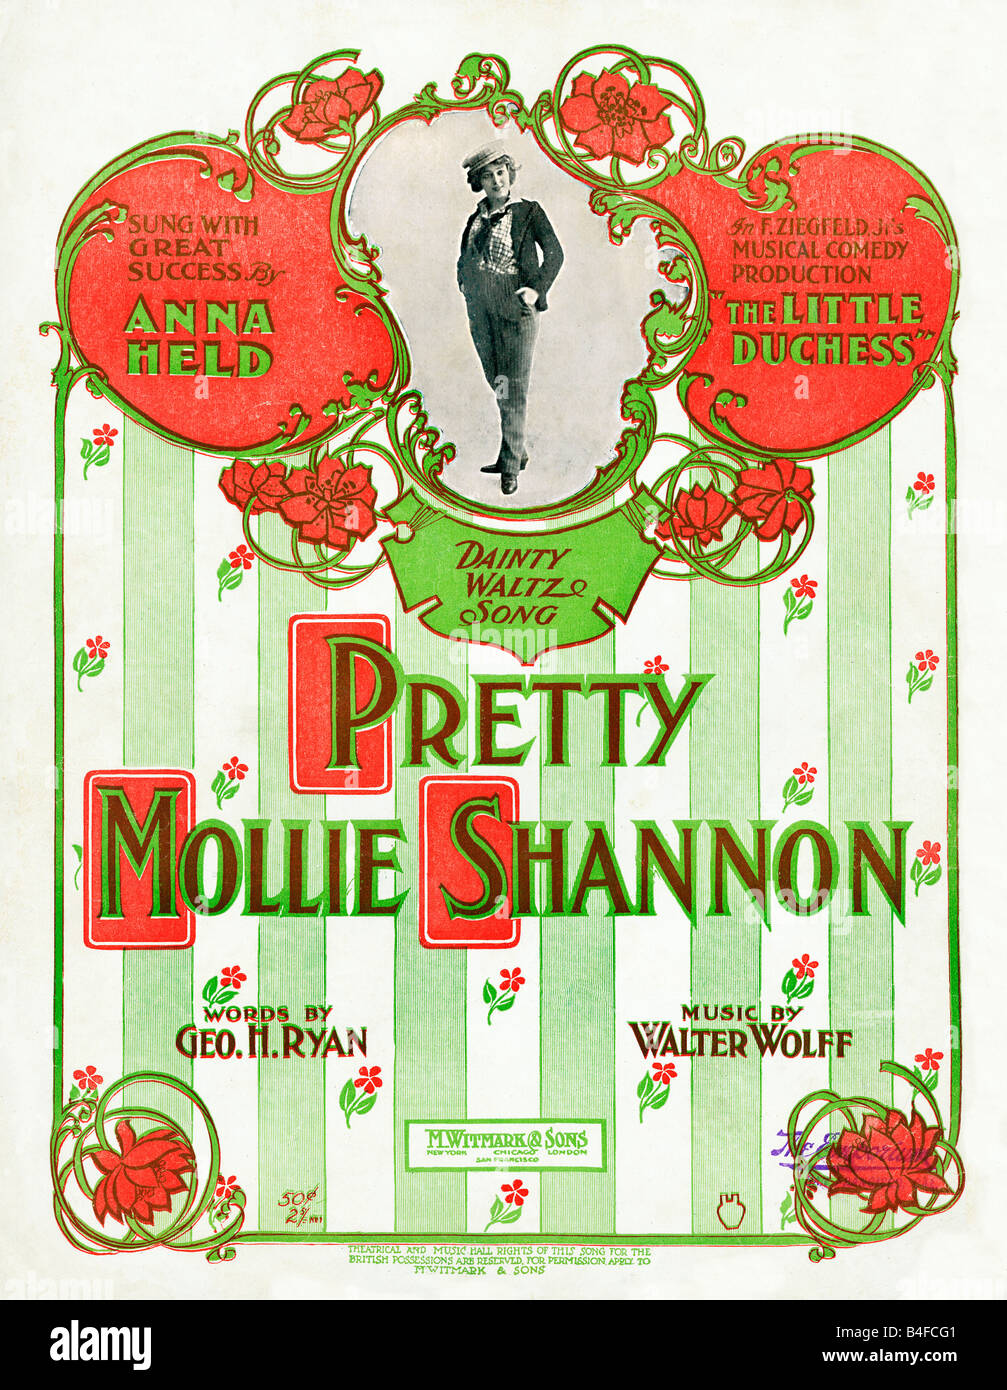 Pretty Molly Shannon 1901 music sheet cover song by Anna Held from the Ziegfeld production The Little Duchess Stock Photo